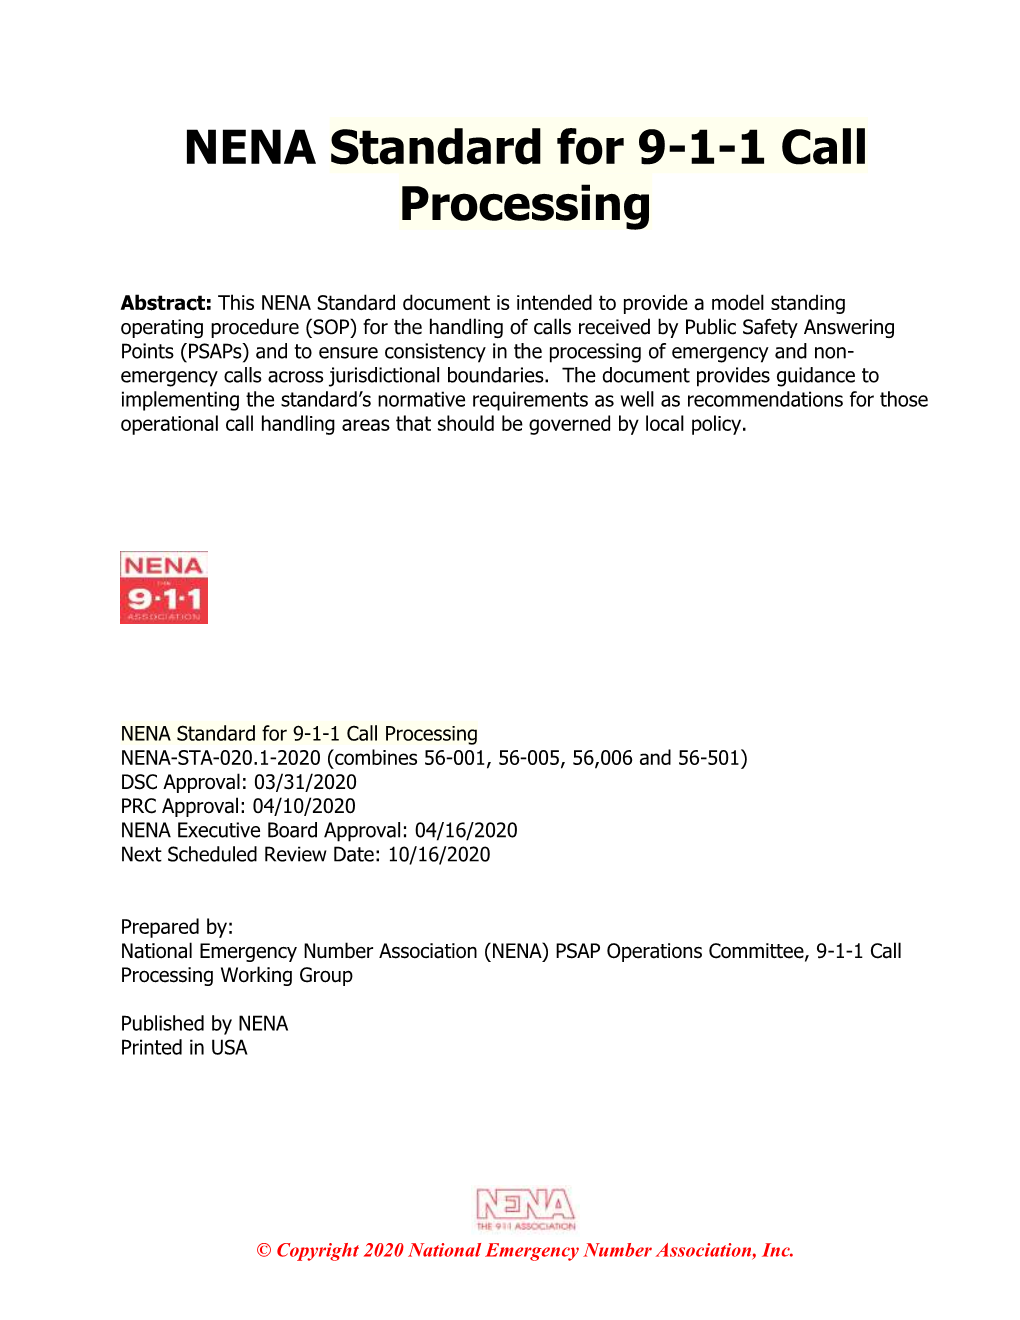 NENA Standard for 9-1-1 Call Processing